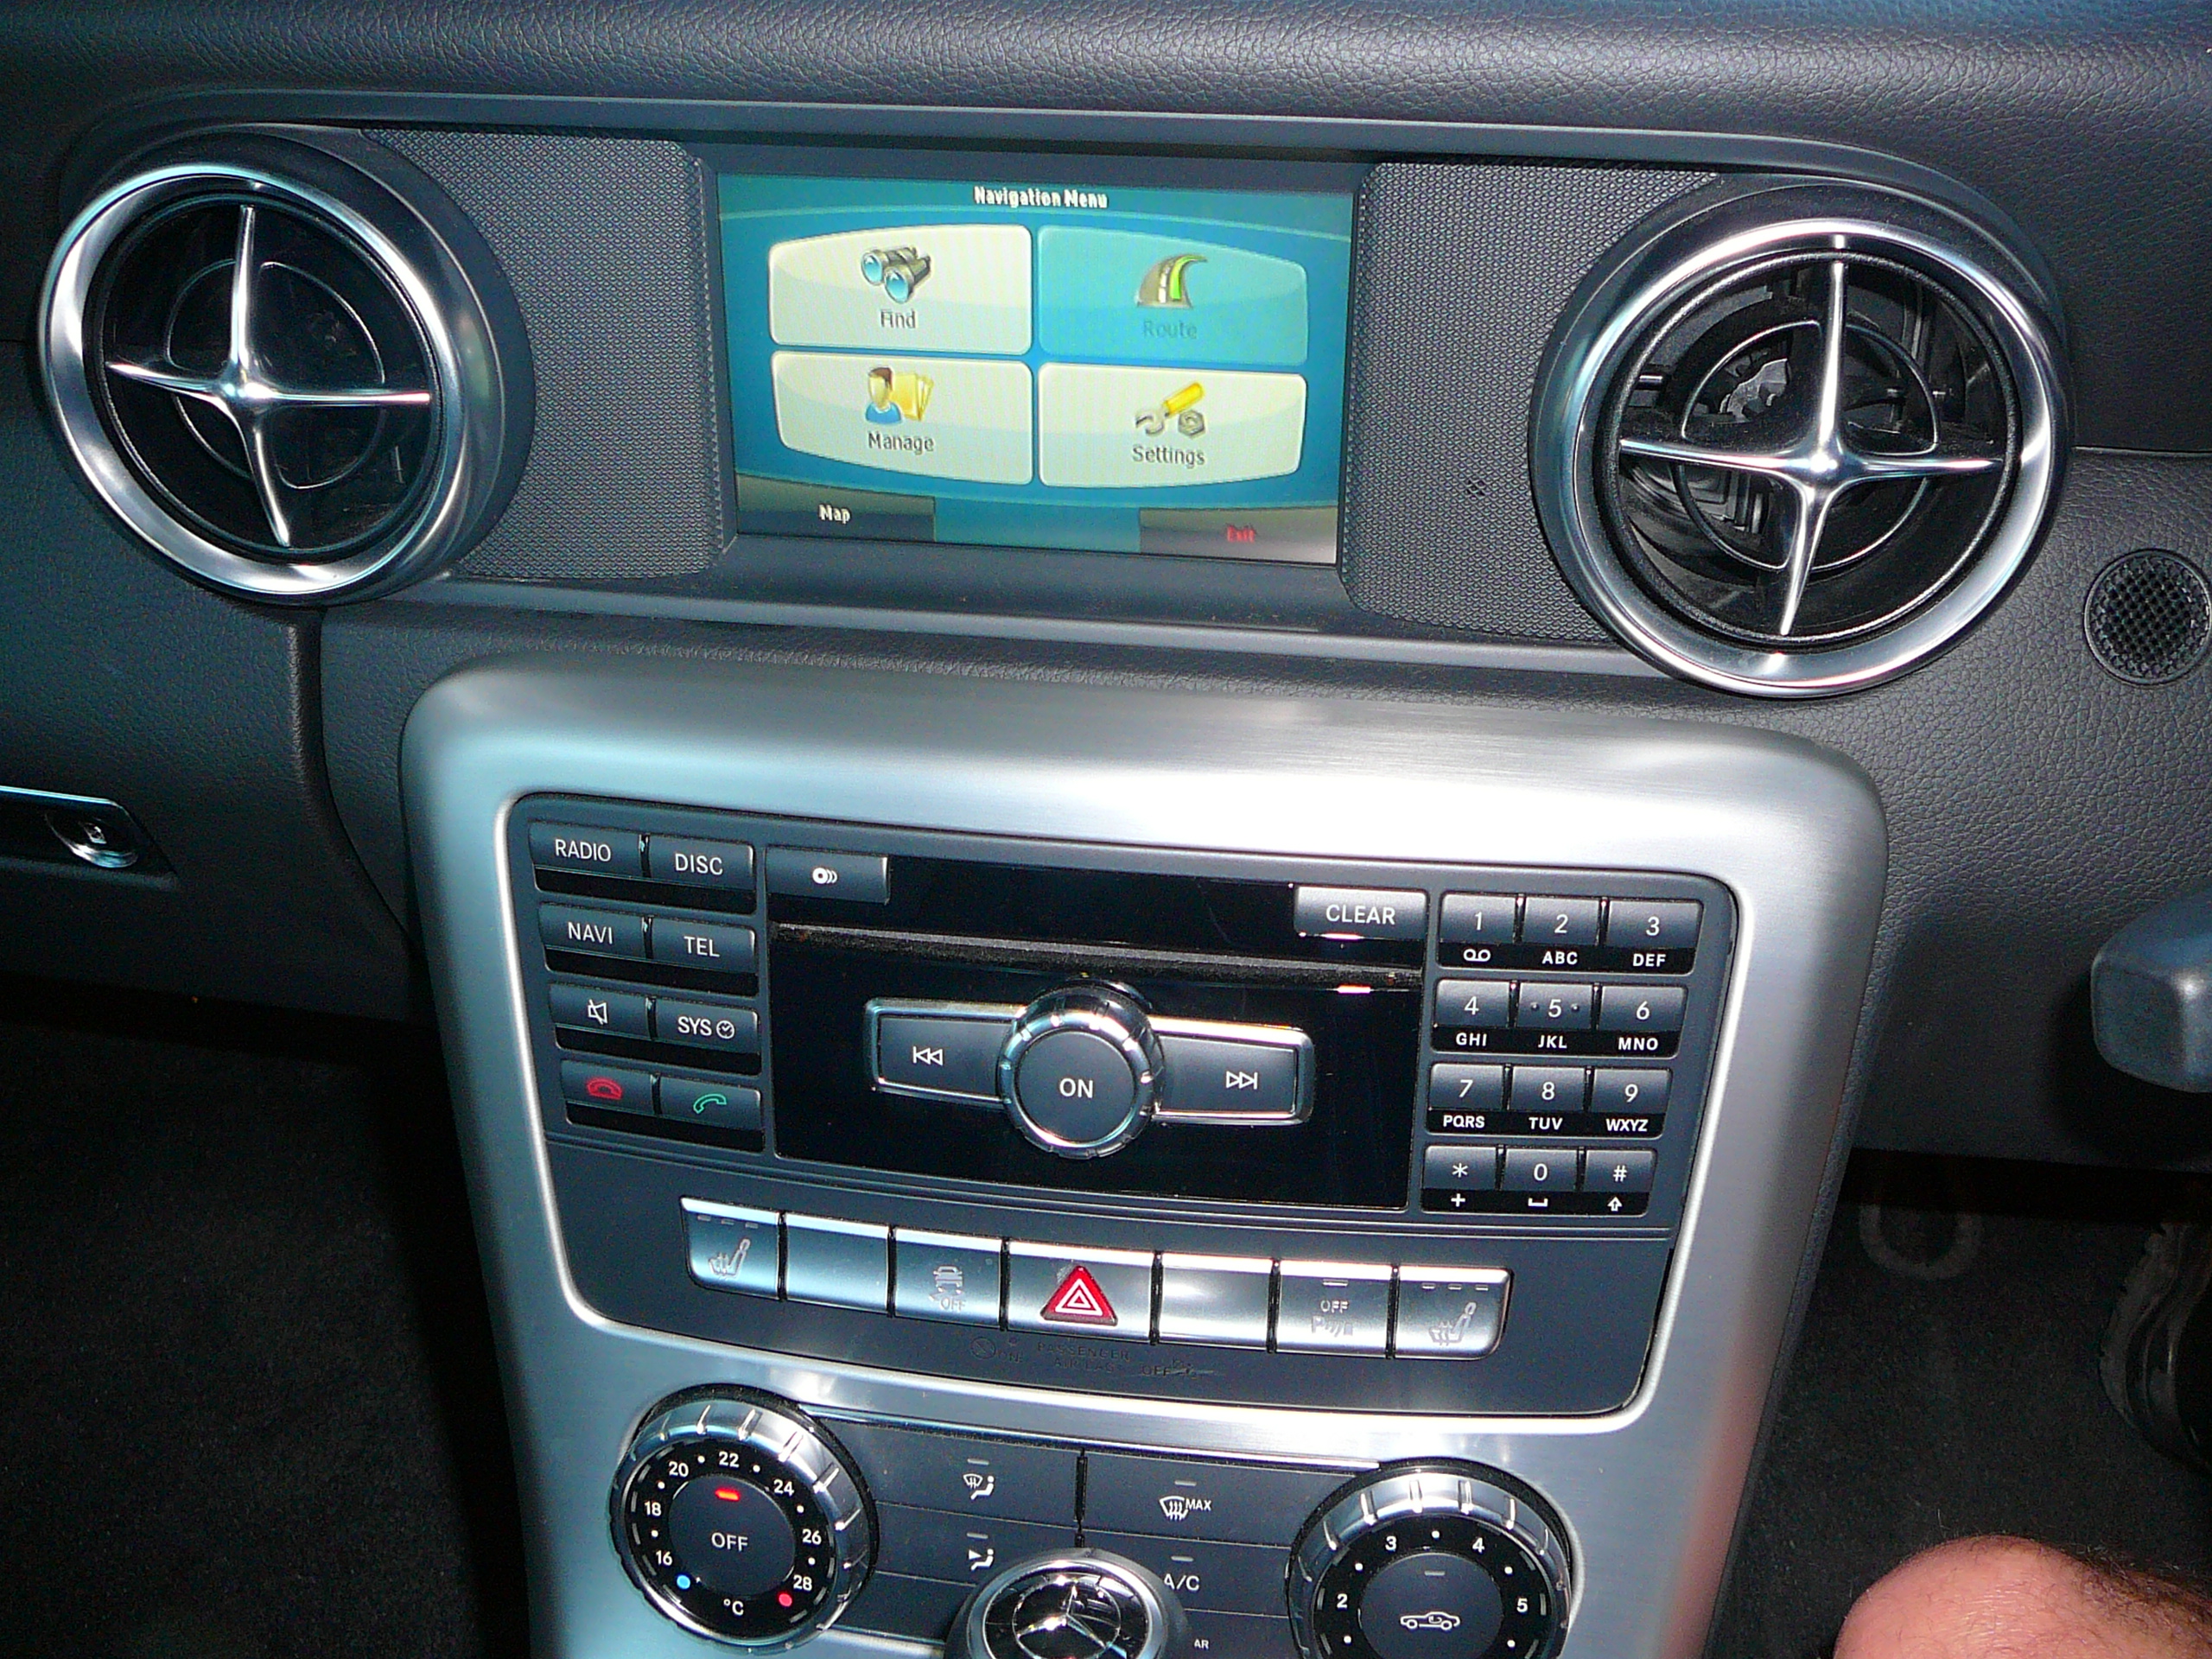 Mercedes SLK 2012, Touch screen GPS Navigation upgrade to factory screen